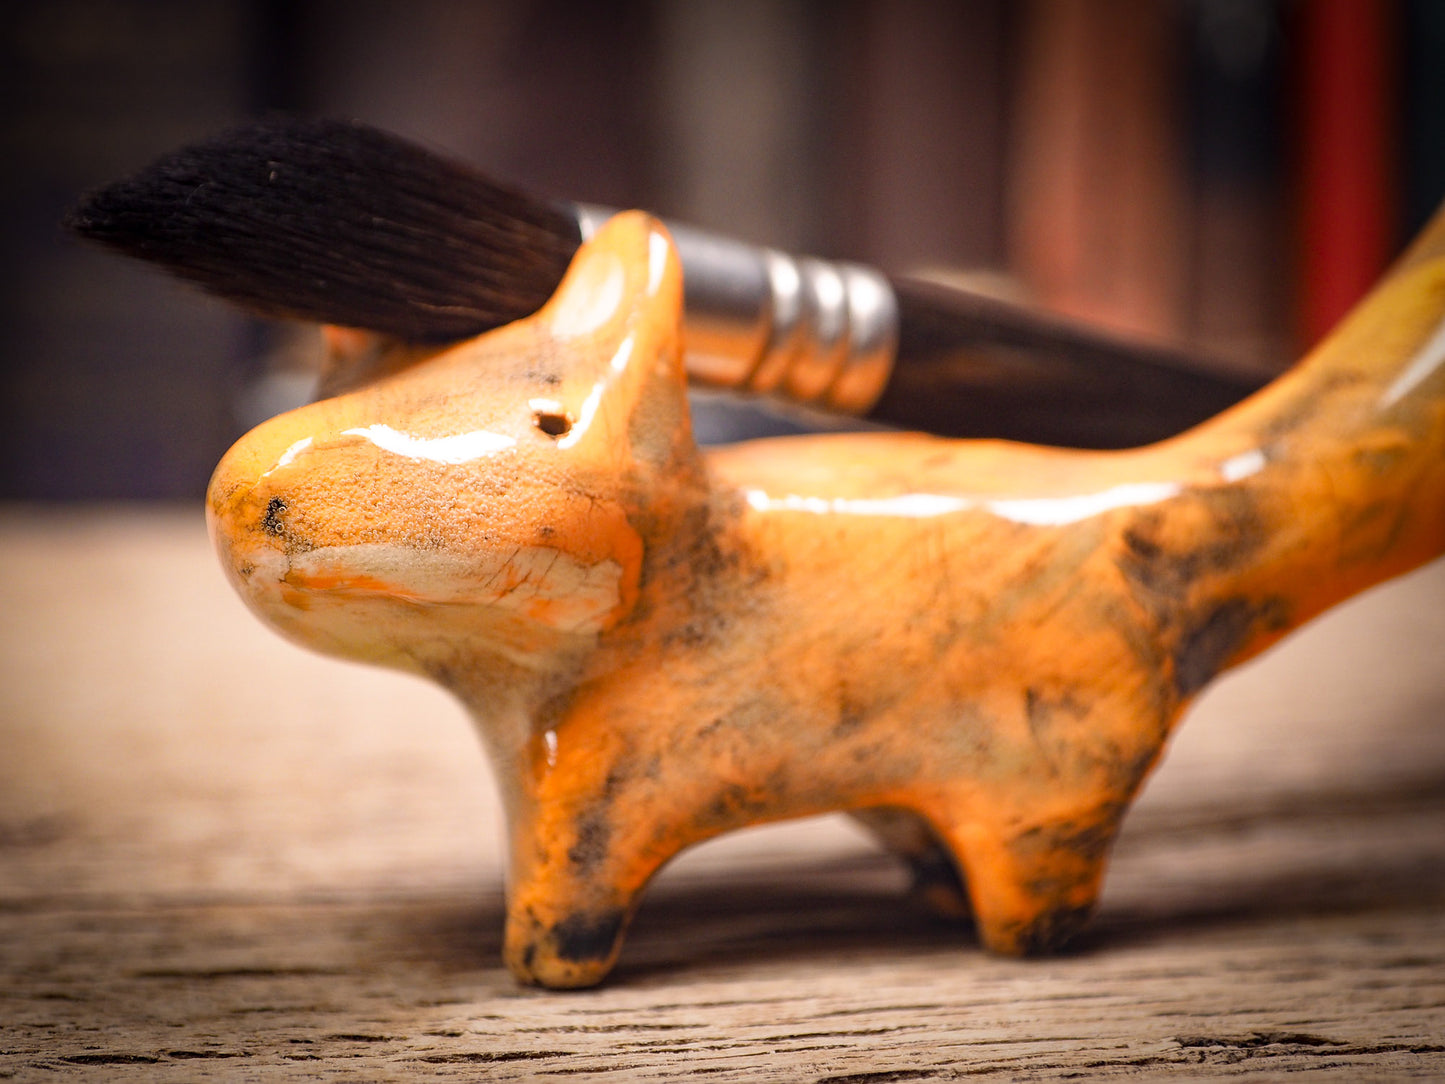 RED FOX #10 - ARTISTS BRUSH AND PENCIL HOLDER